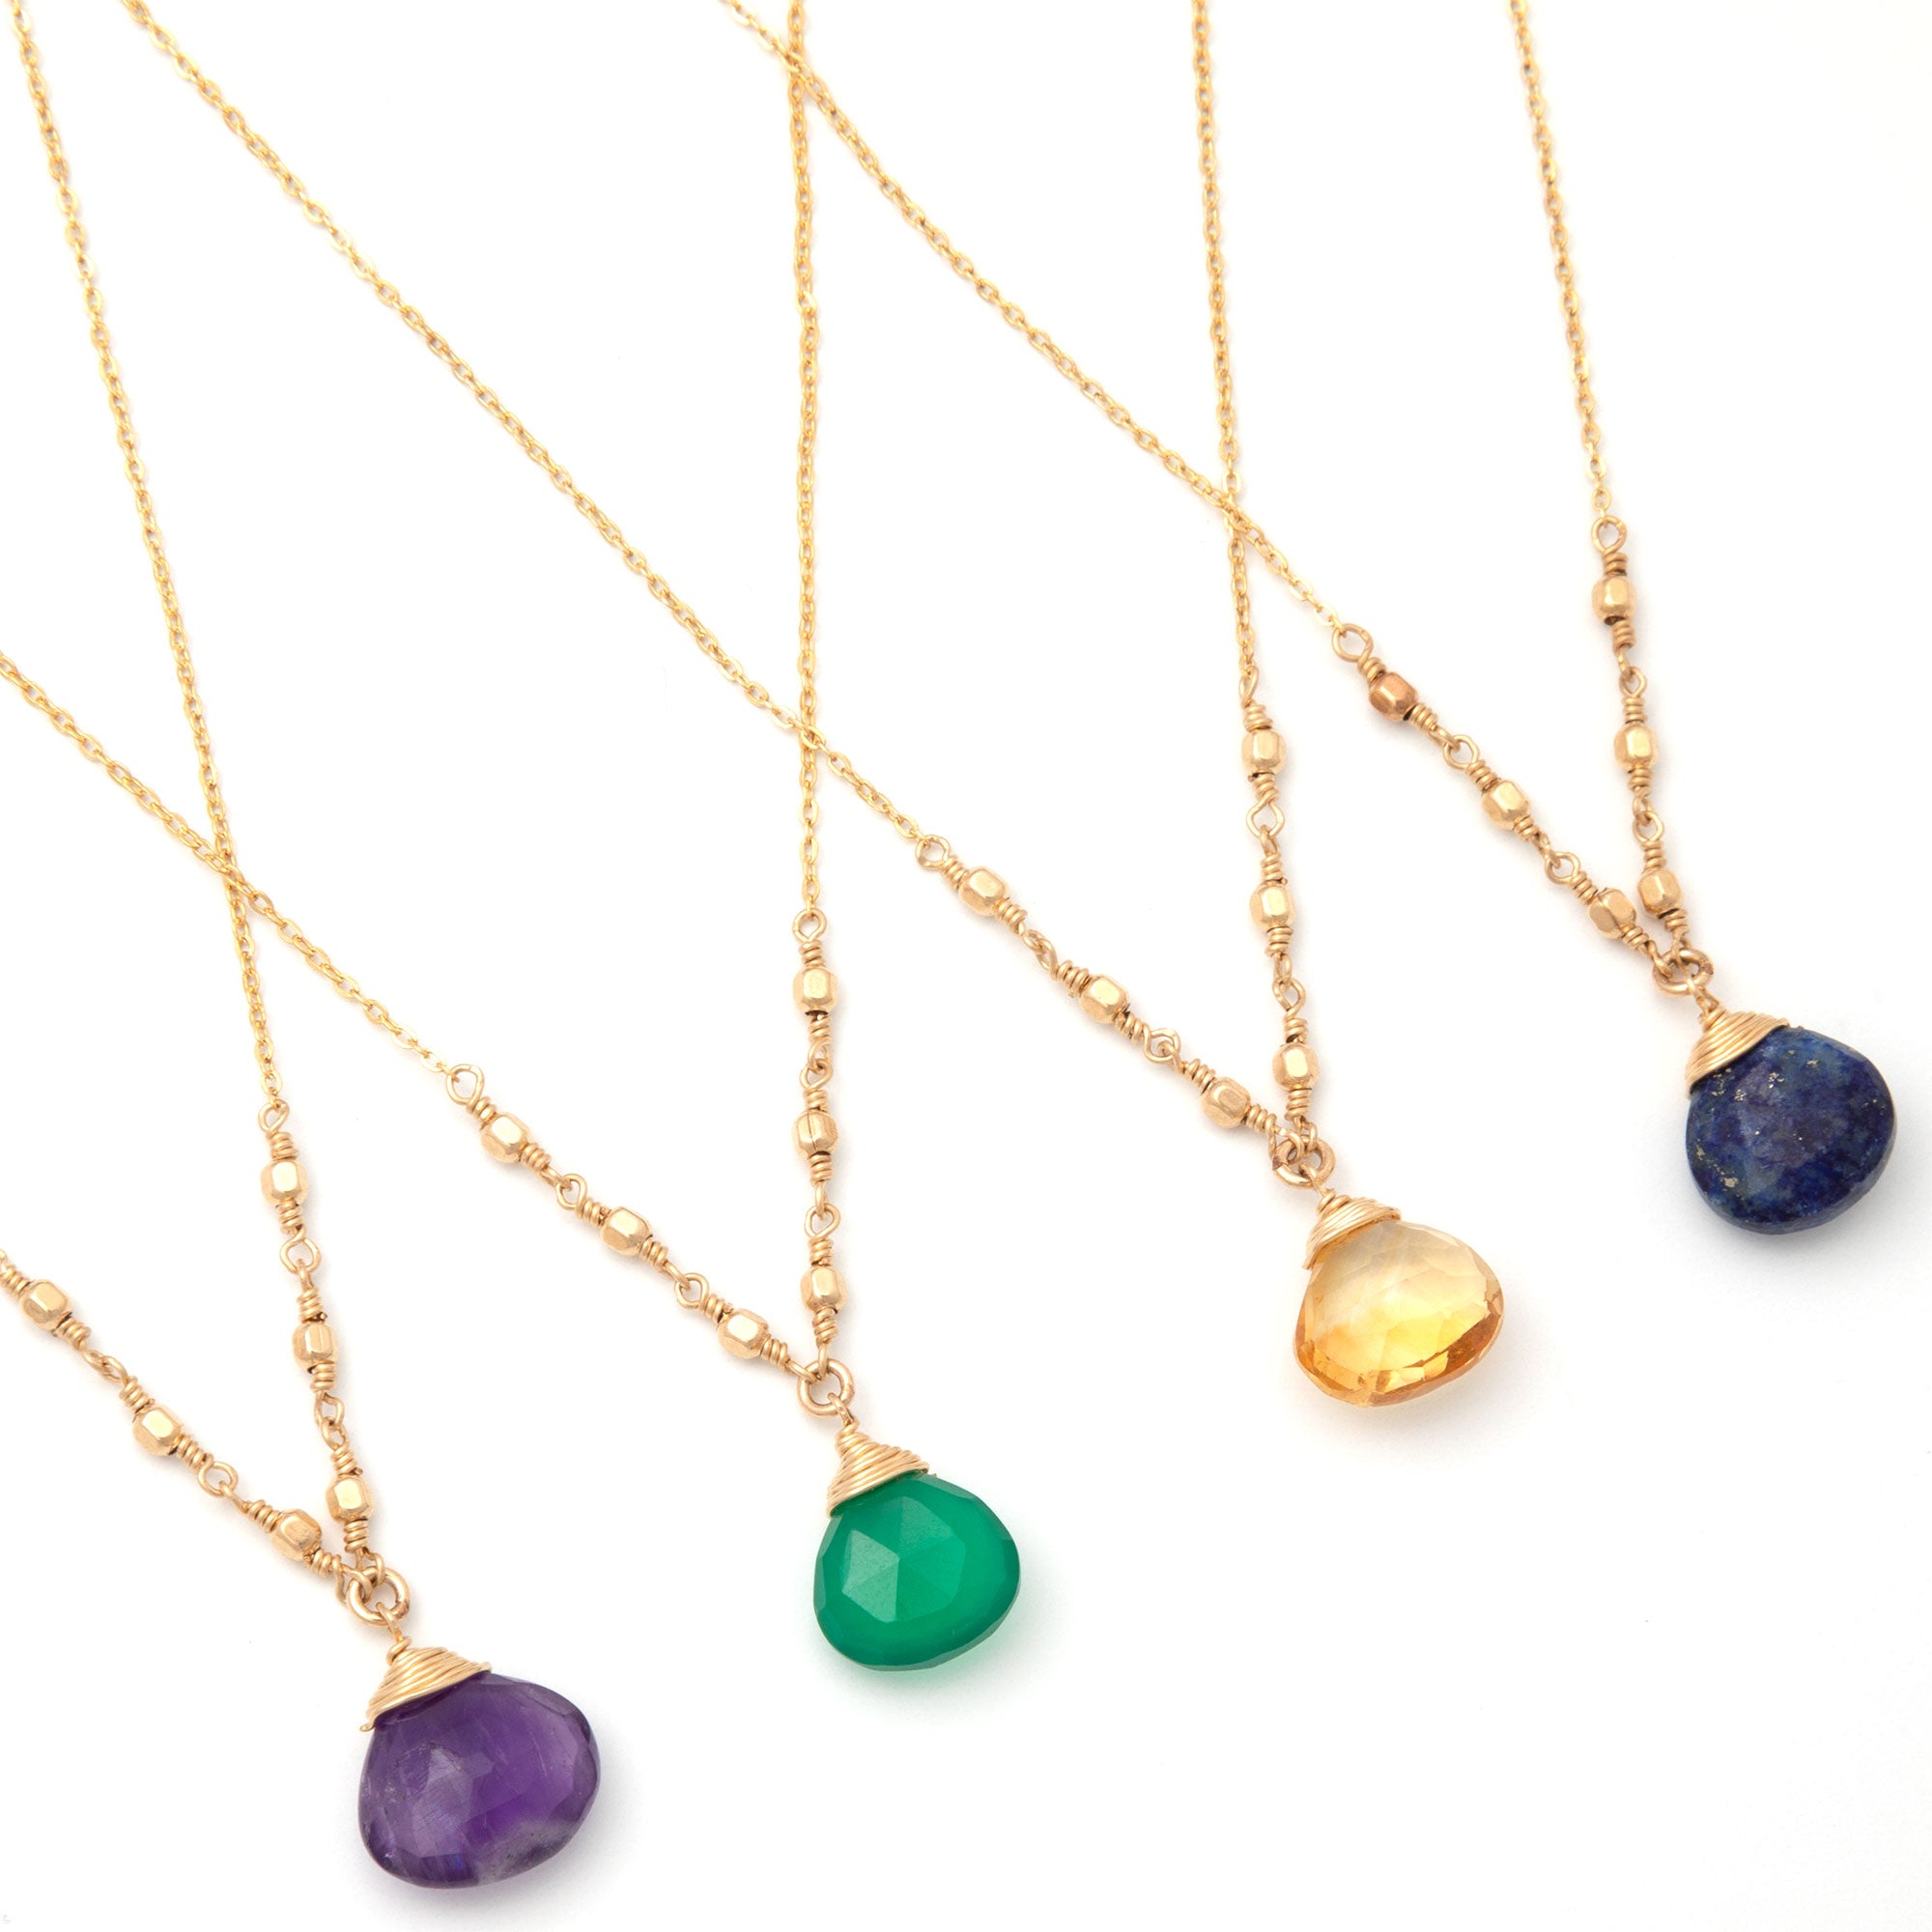 Gold Filled Necklace With Gemstone - Lapis Lazuli